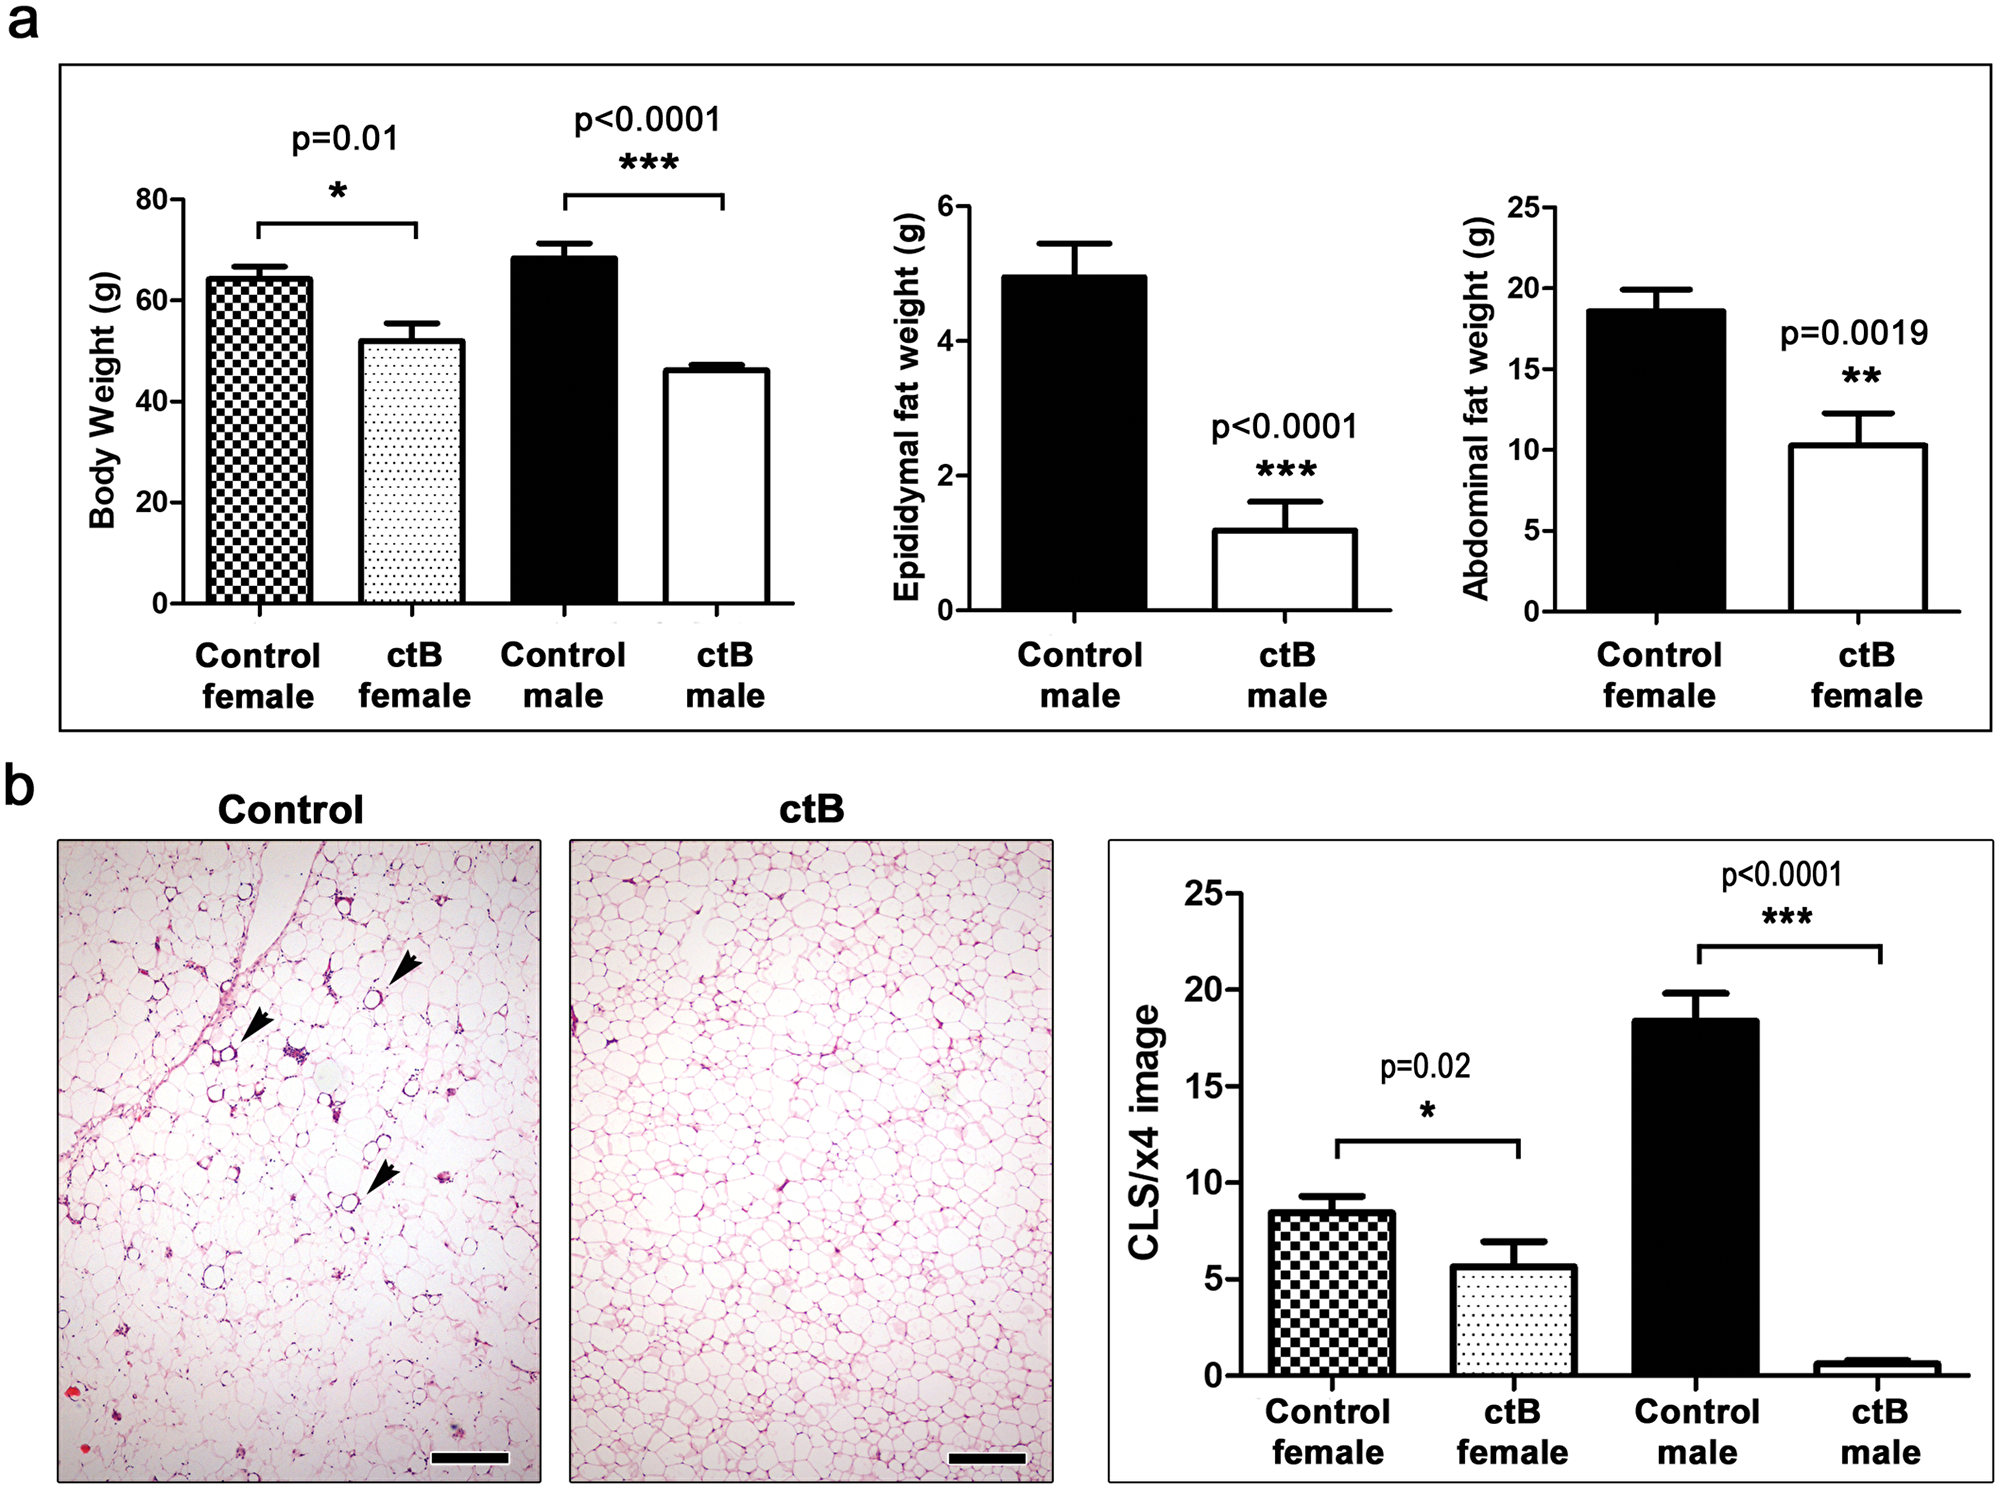 Early-life oral dosing with ctB protects CD1 outbred mice from obesity later in life.